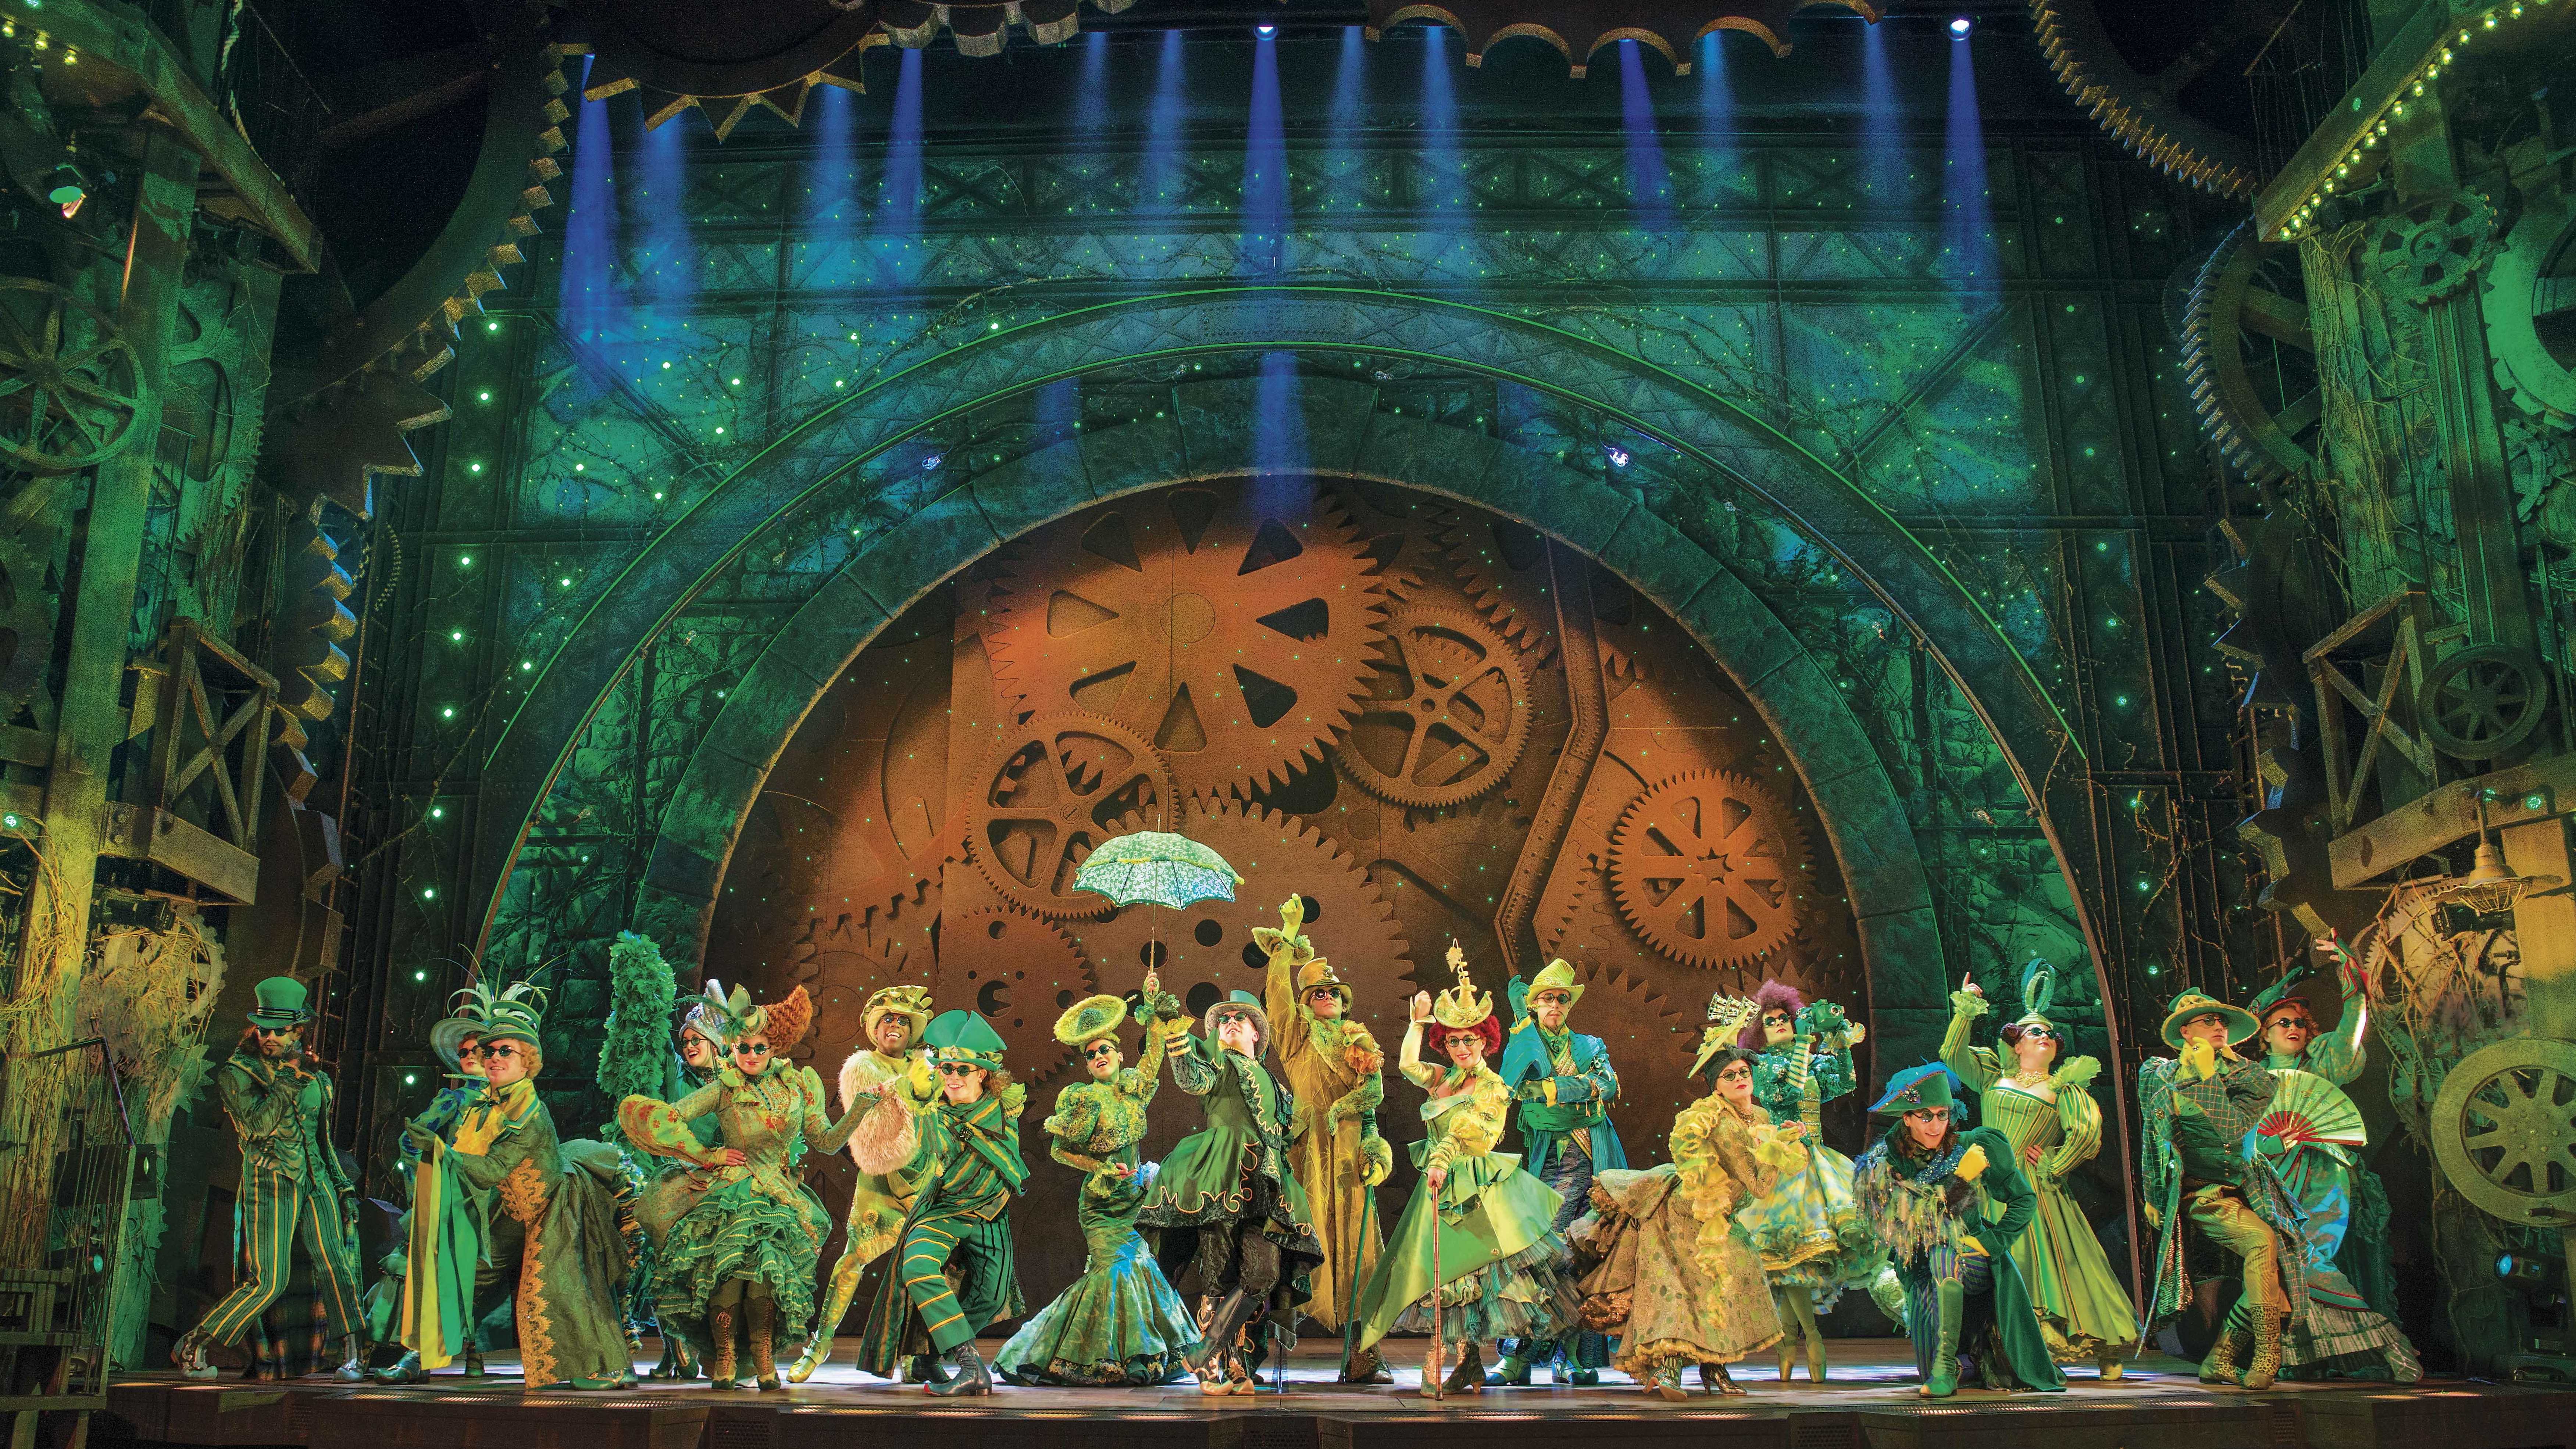 Top 10 Musicals To Take the Kids To - Heart7006 x 3942